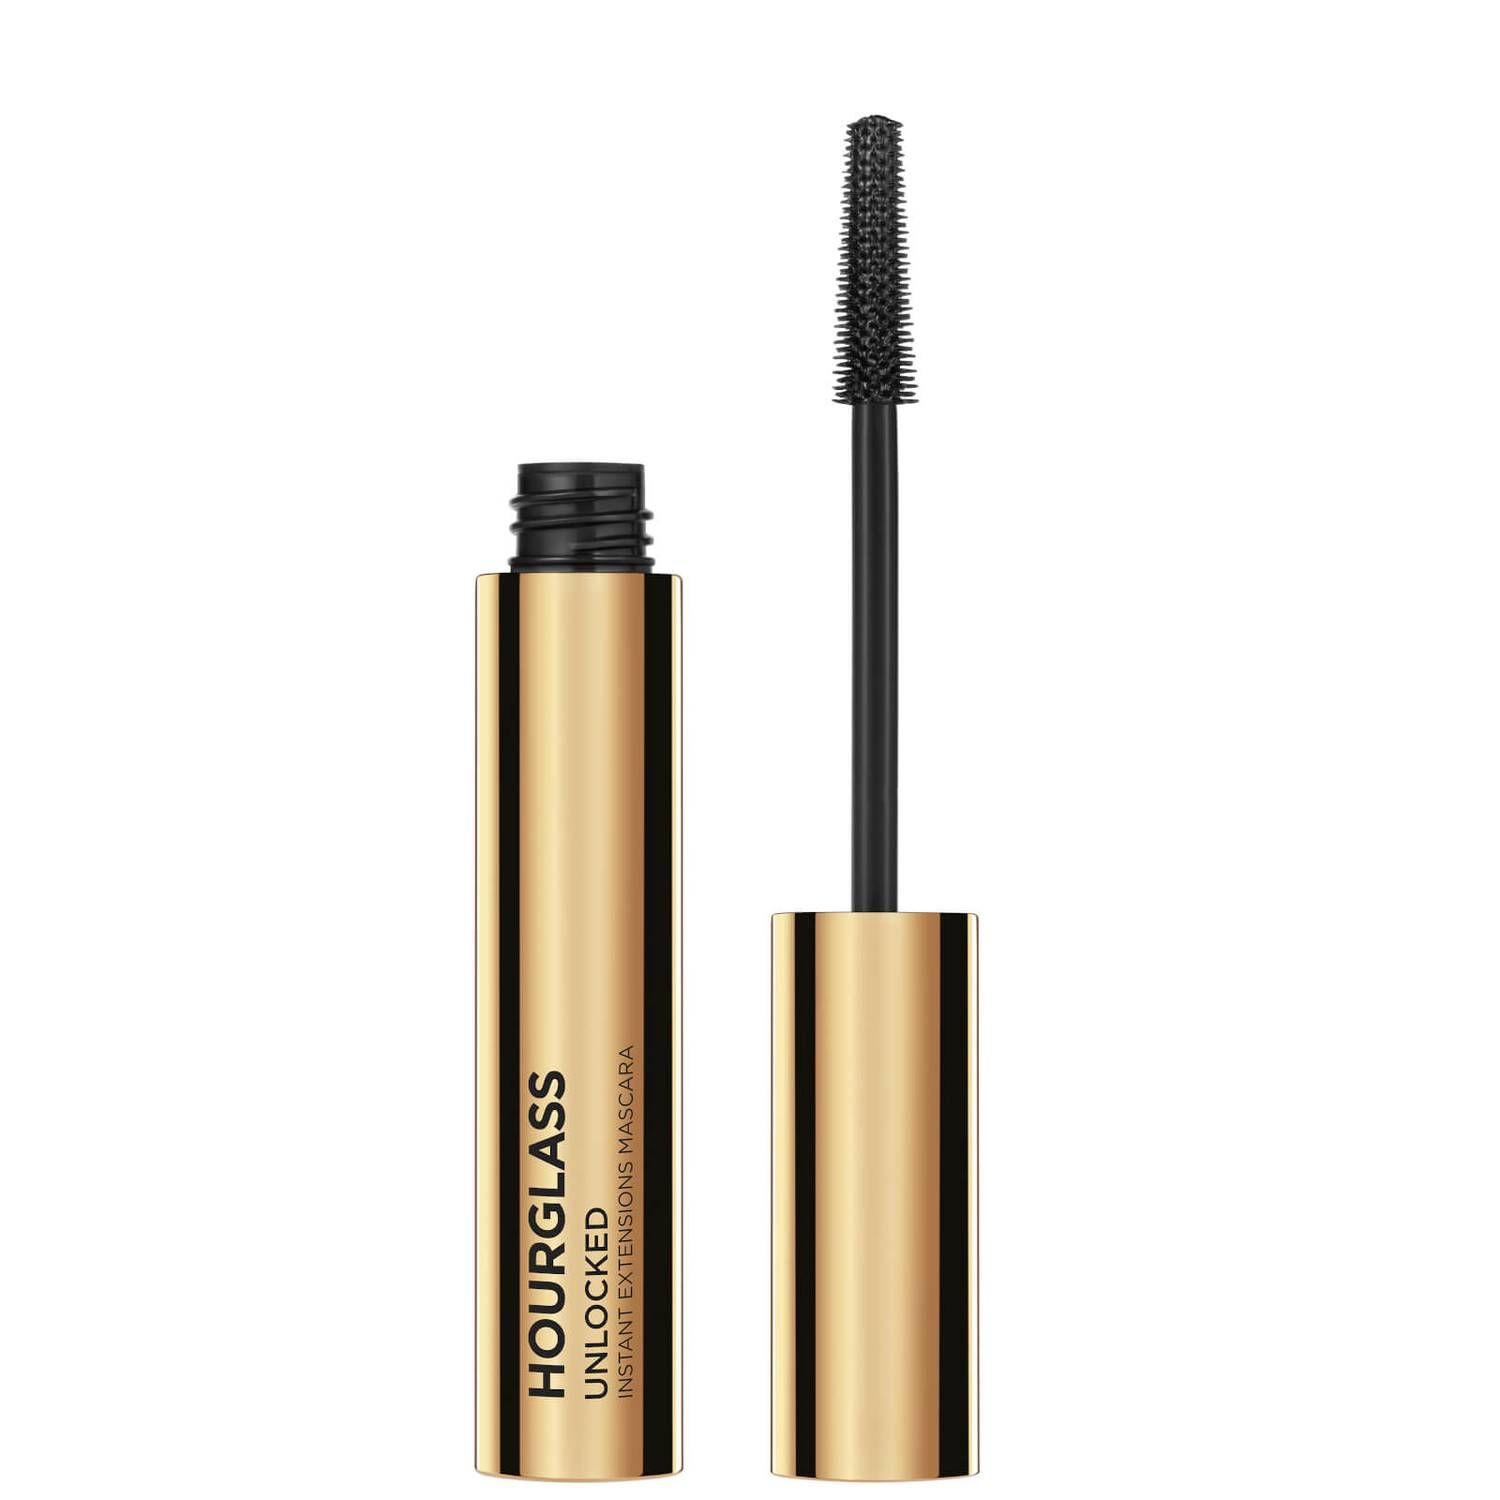 Hourglass Unlocked Extreme Length and Definition Mascara 10g | Cult Beauty